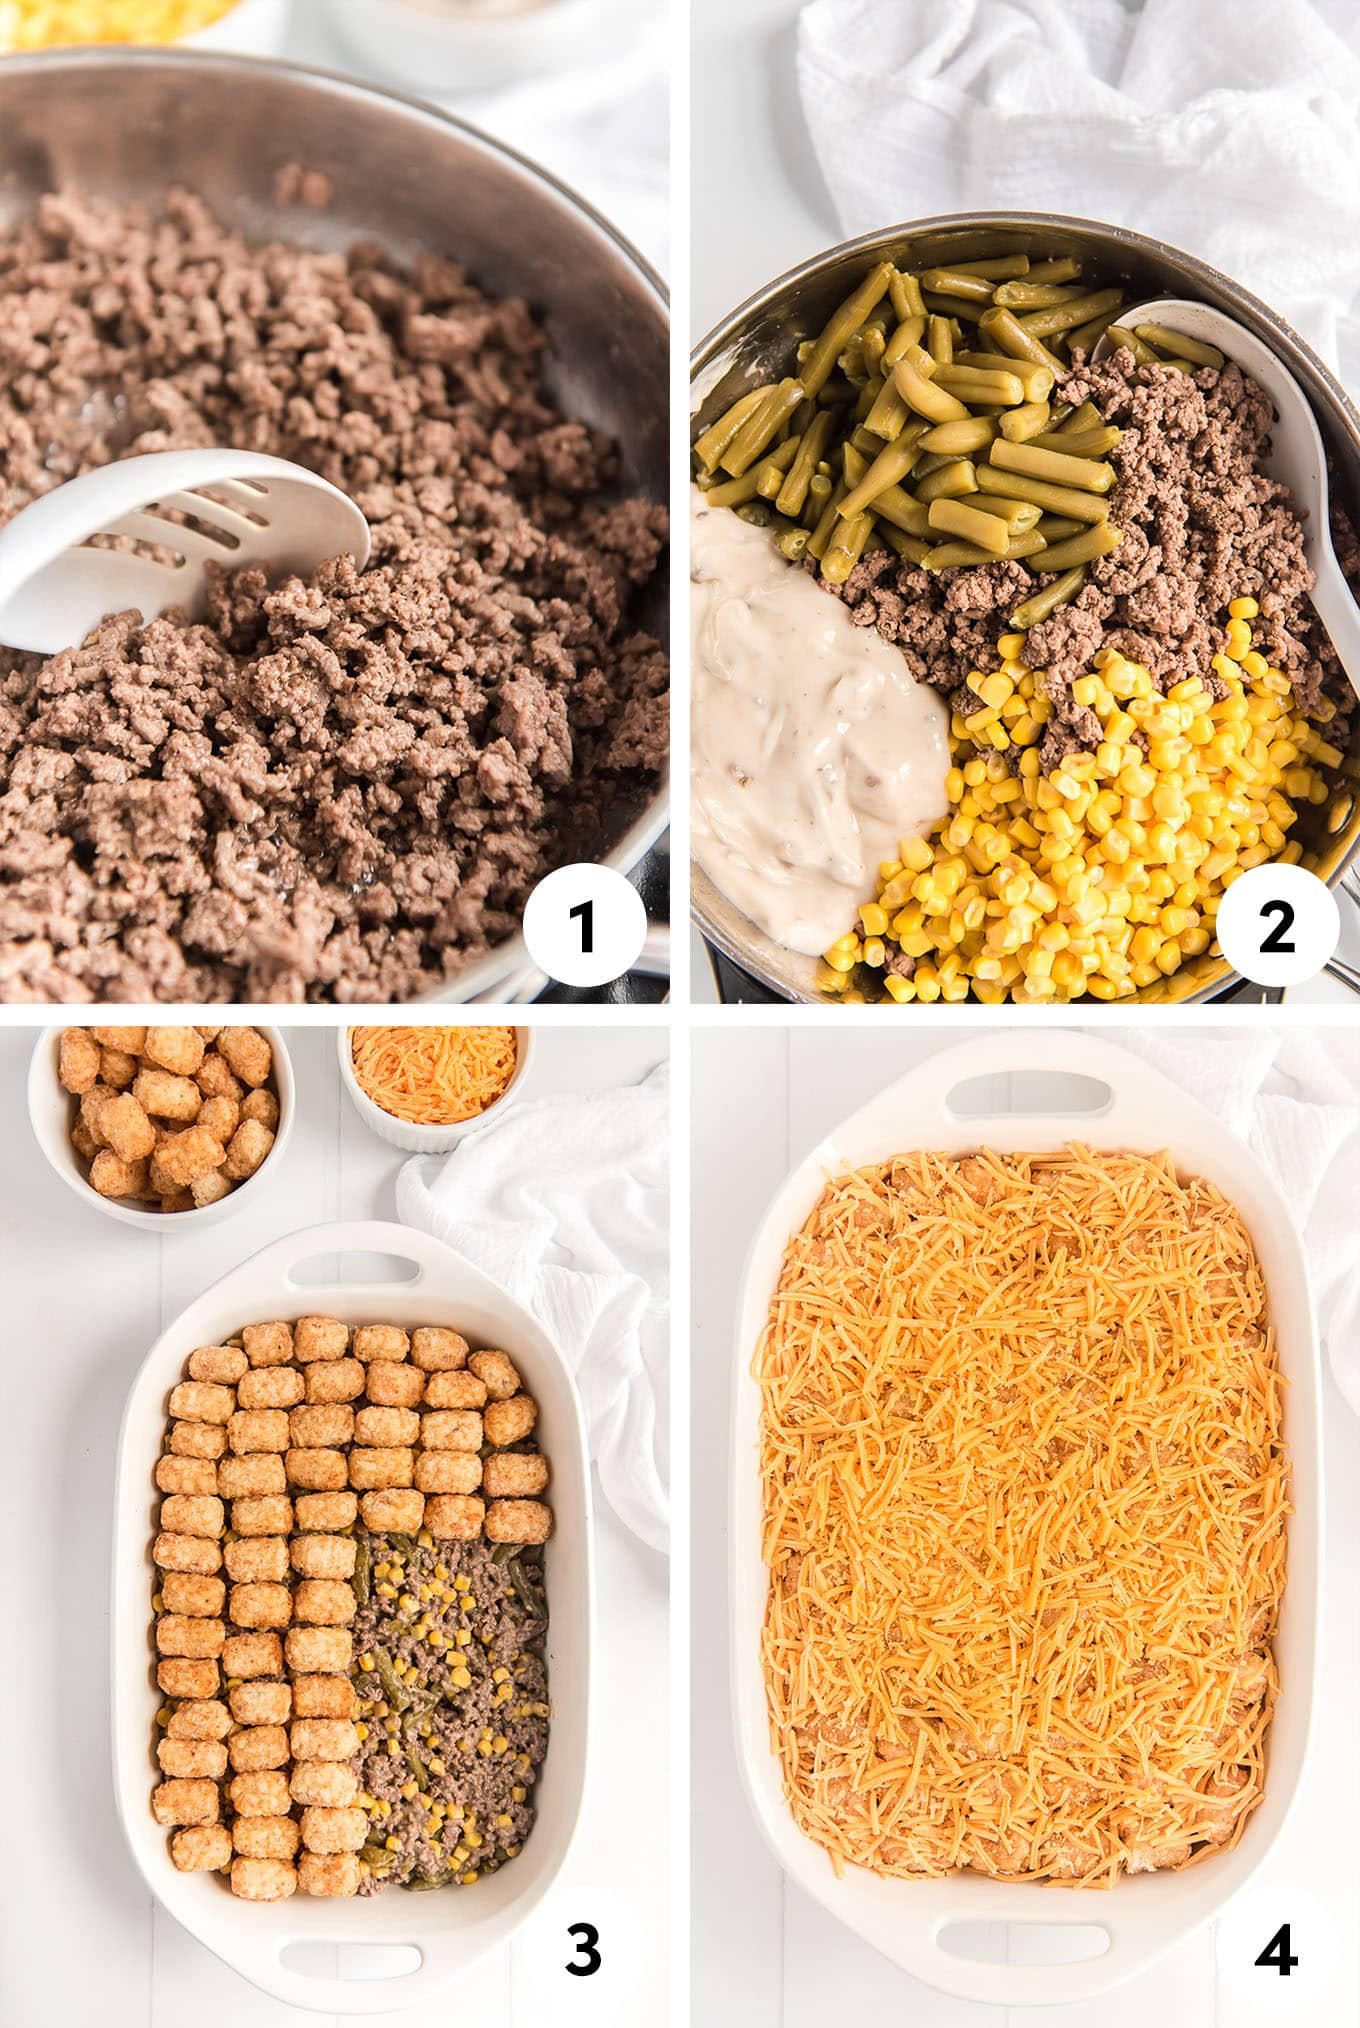 A collage of images showing cooking the ground beef, mixing everything together, and assembling the casserole.